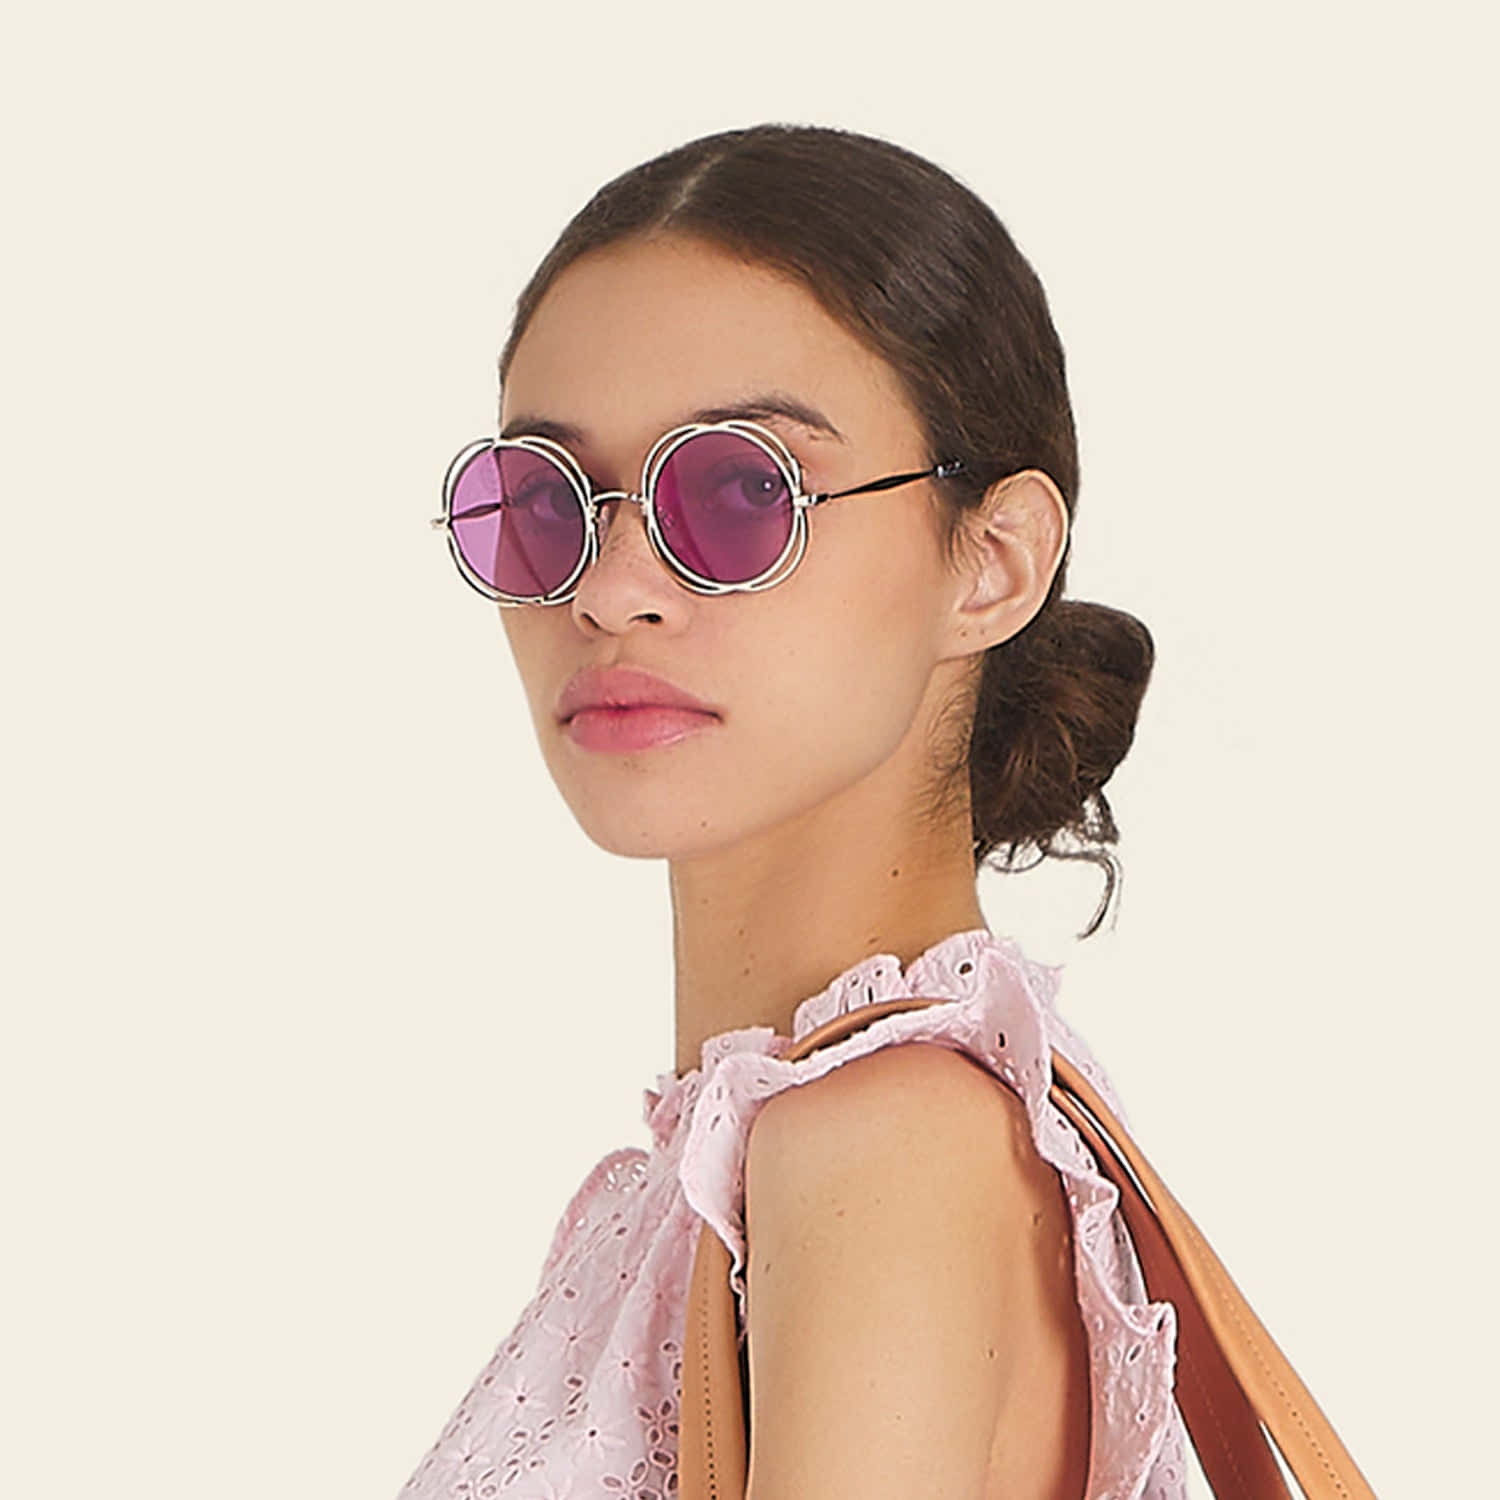 Get Ready for Summer with a Cool Pair of Purple Sunglasses! Wallpaper